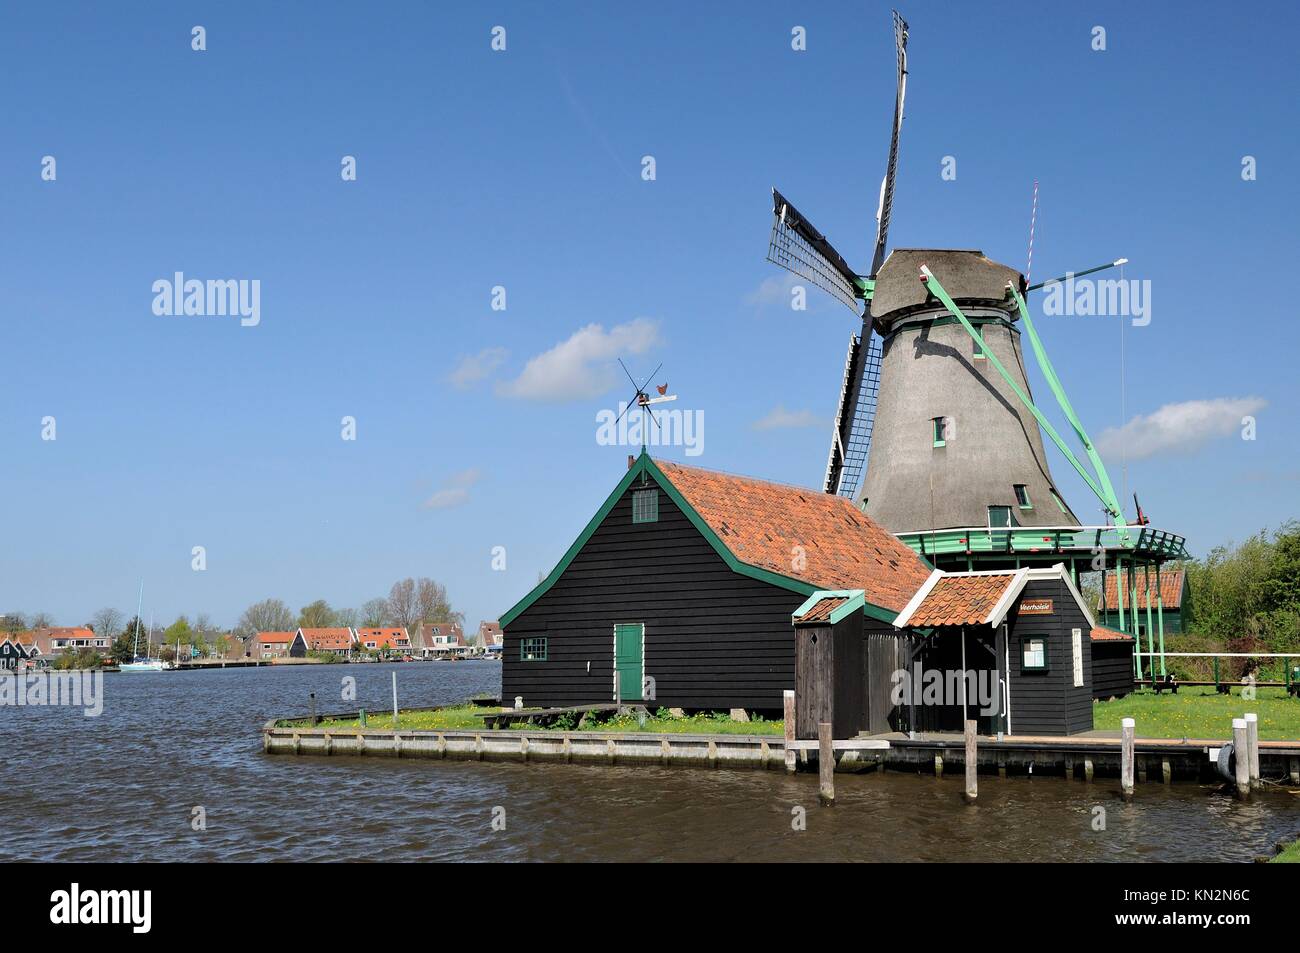 view of traditional windmill at touristic location, shot in bright spring light Stock Photo